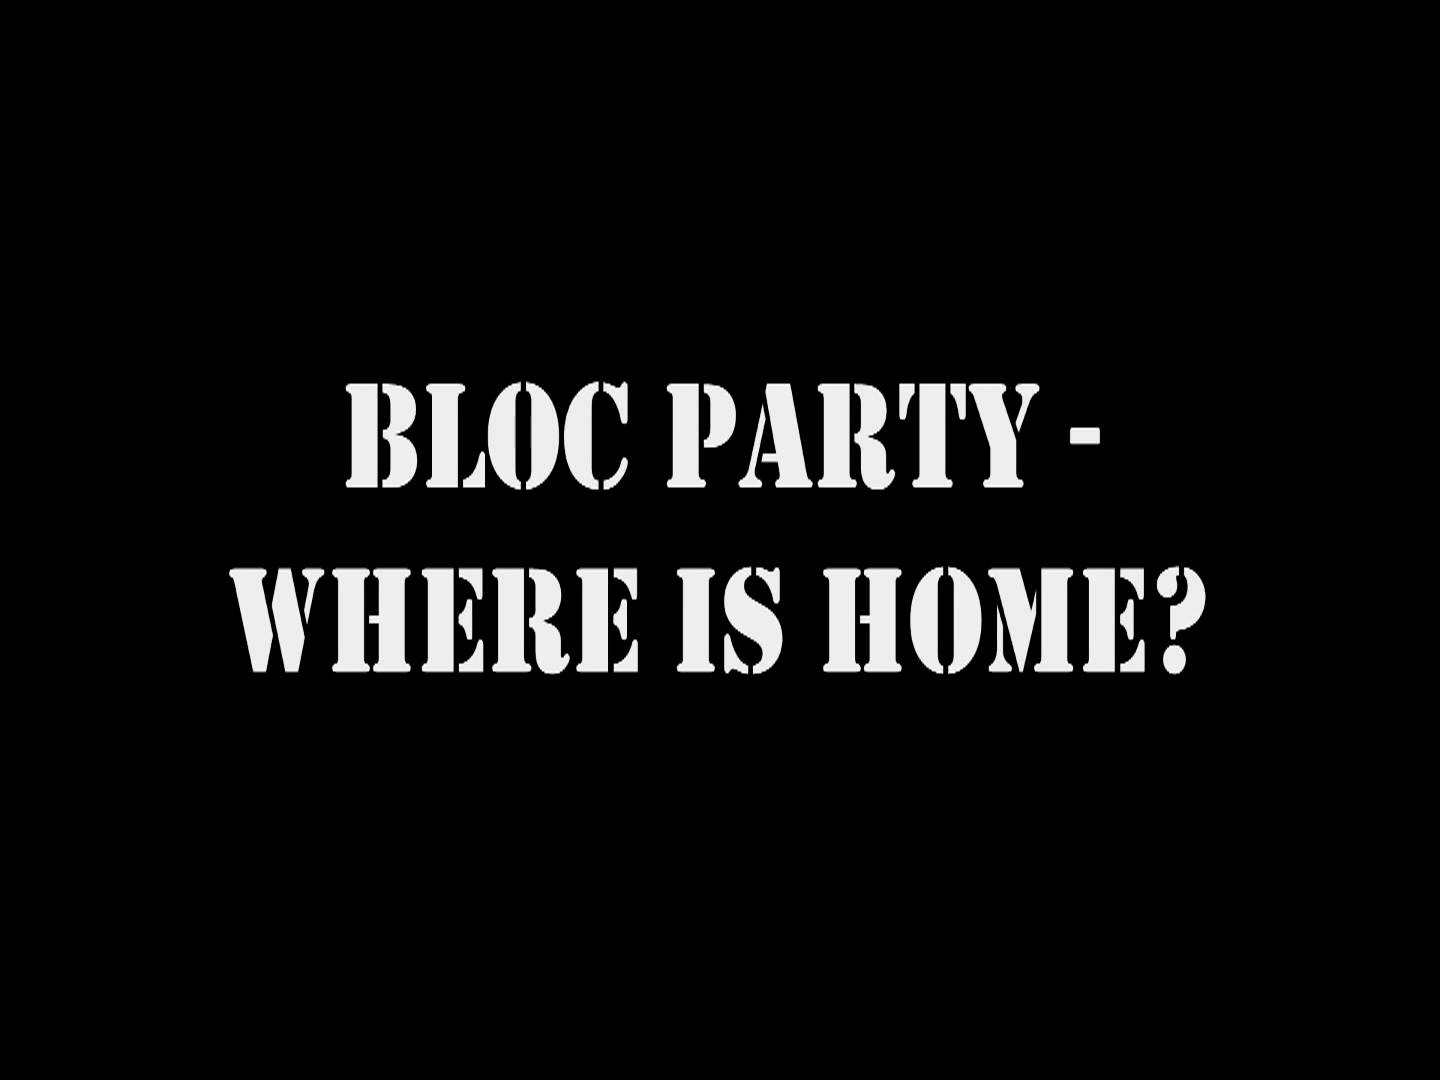 Bloc Party - Where is Home